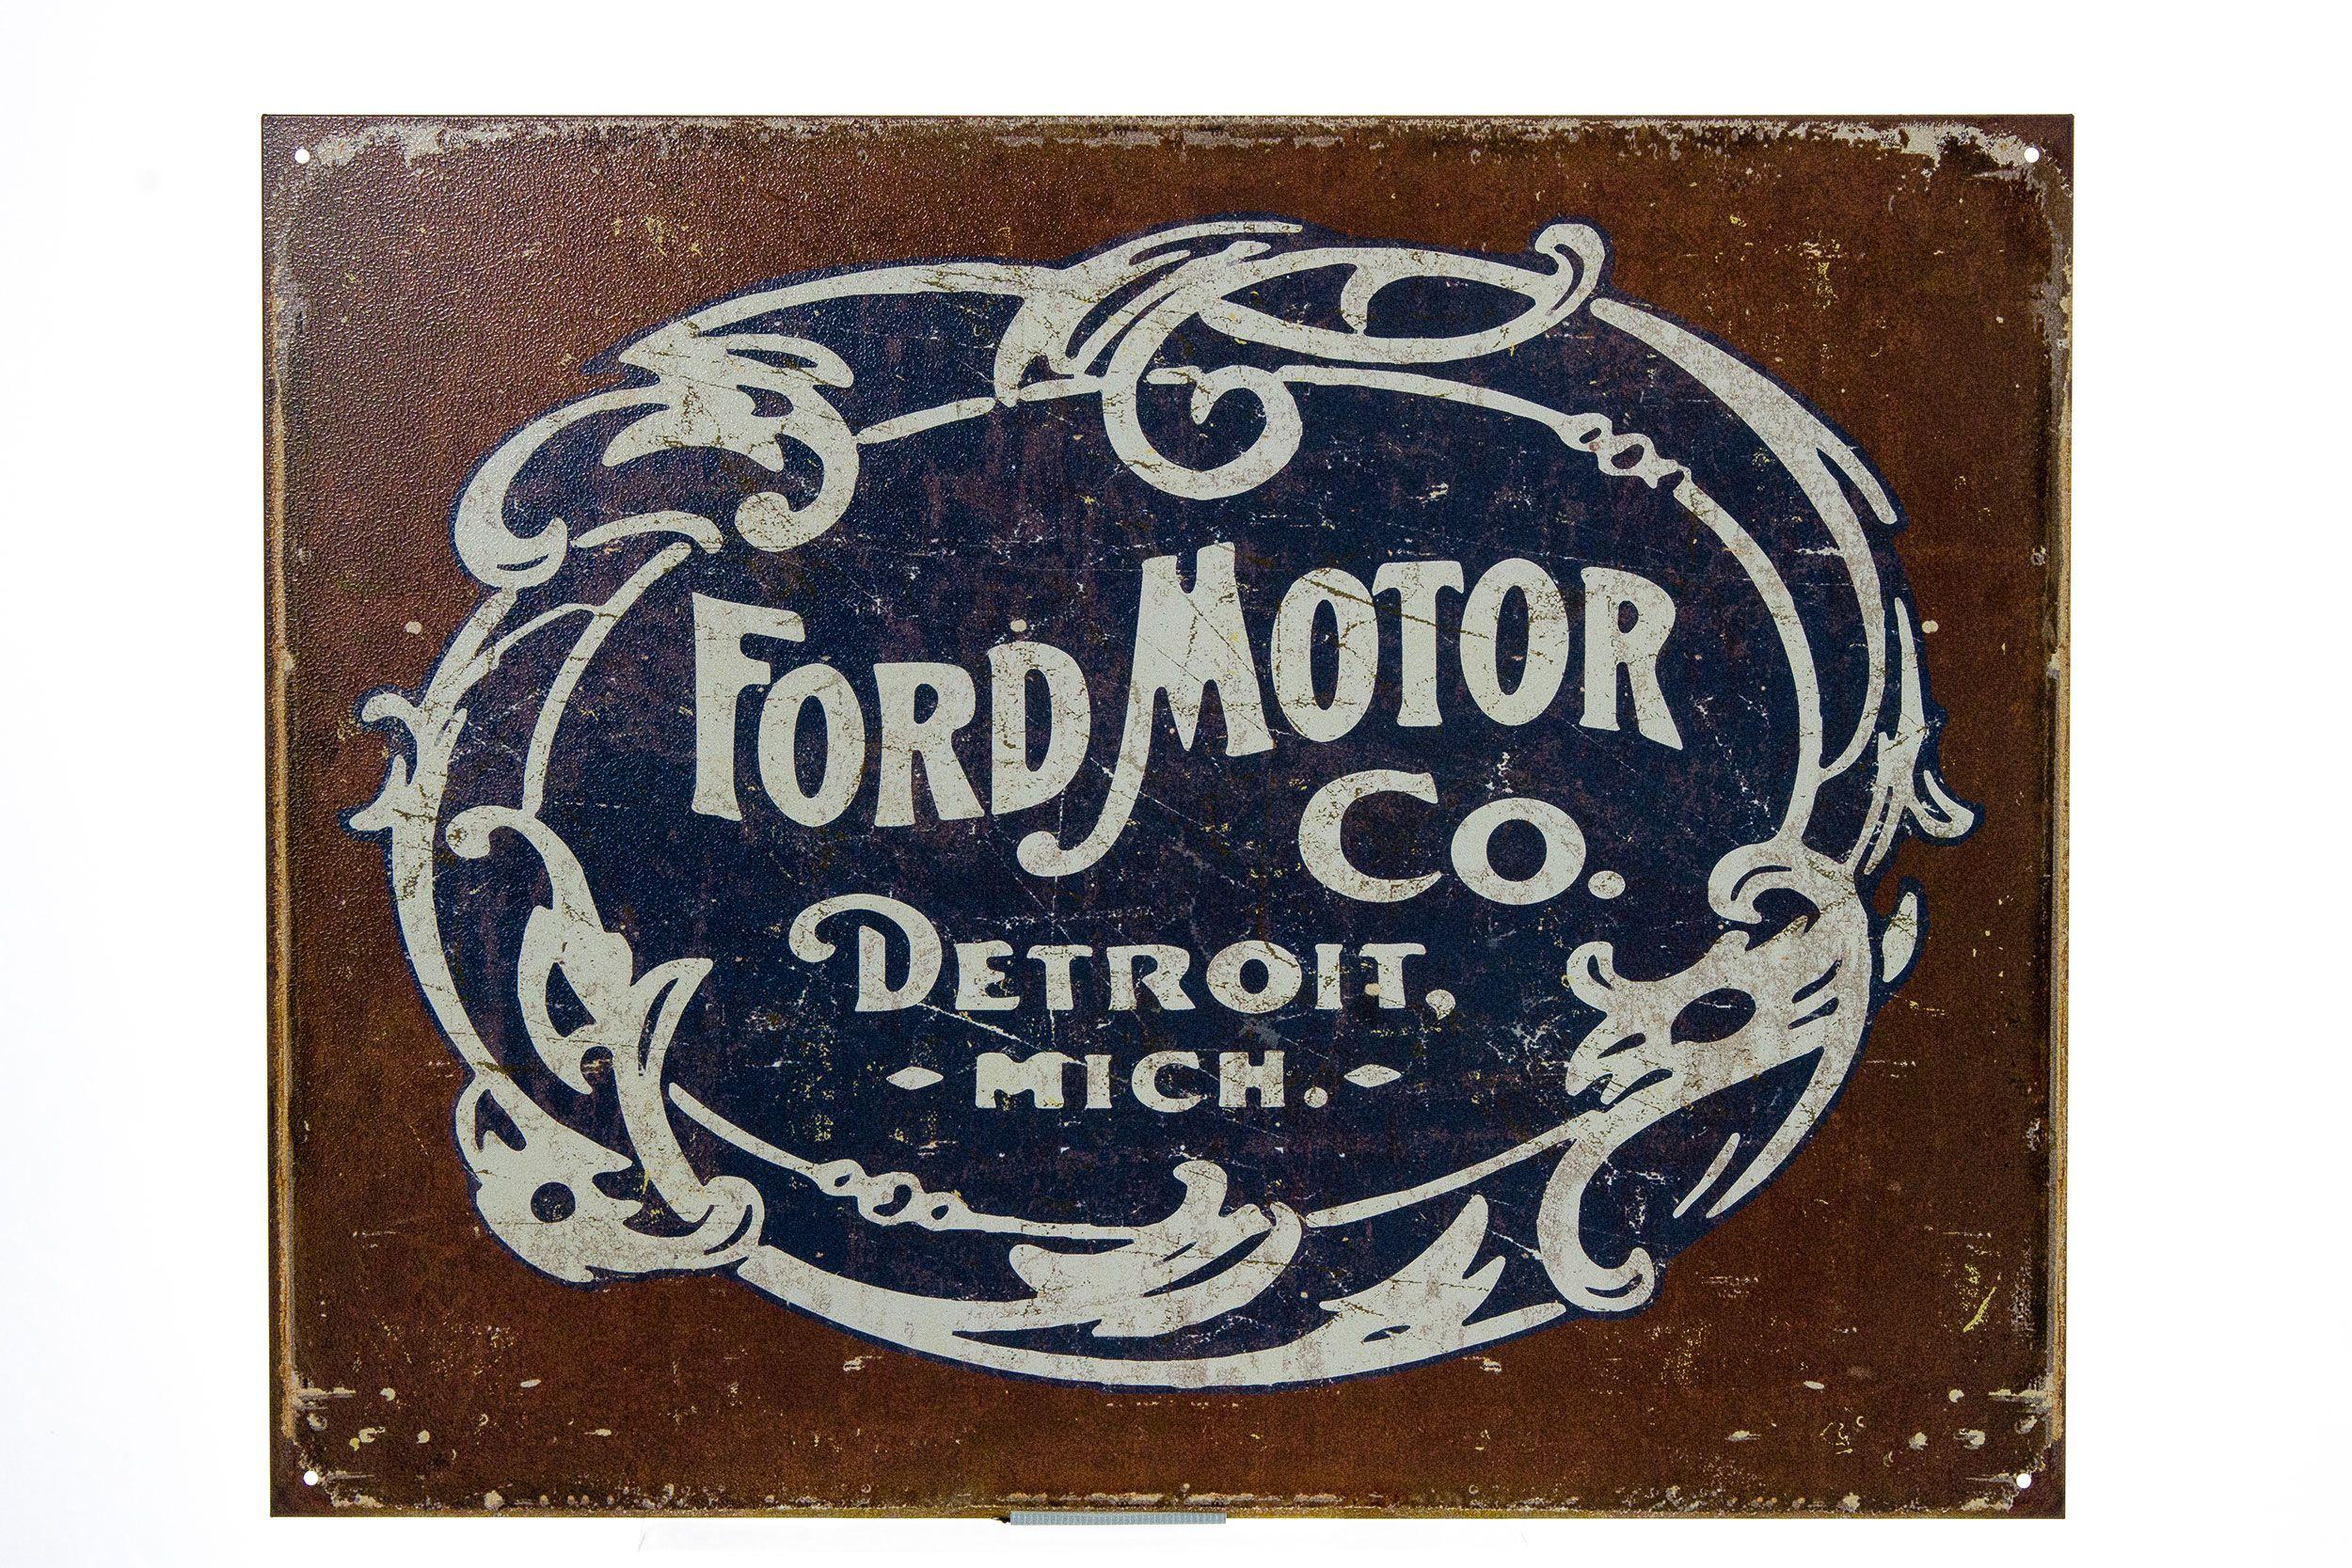 New Ford Motor Logo - Ford Motor Company Vintage Logo Metal Sign. Ford Piquette Avenue Plant